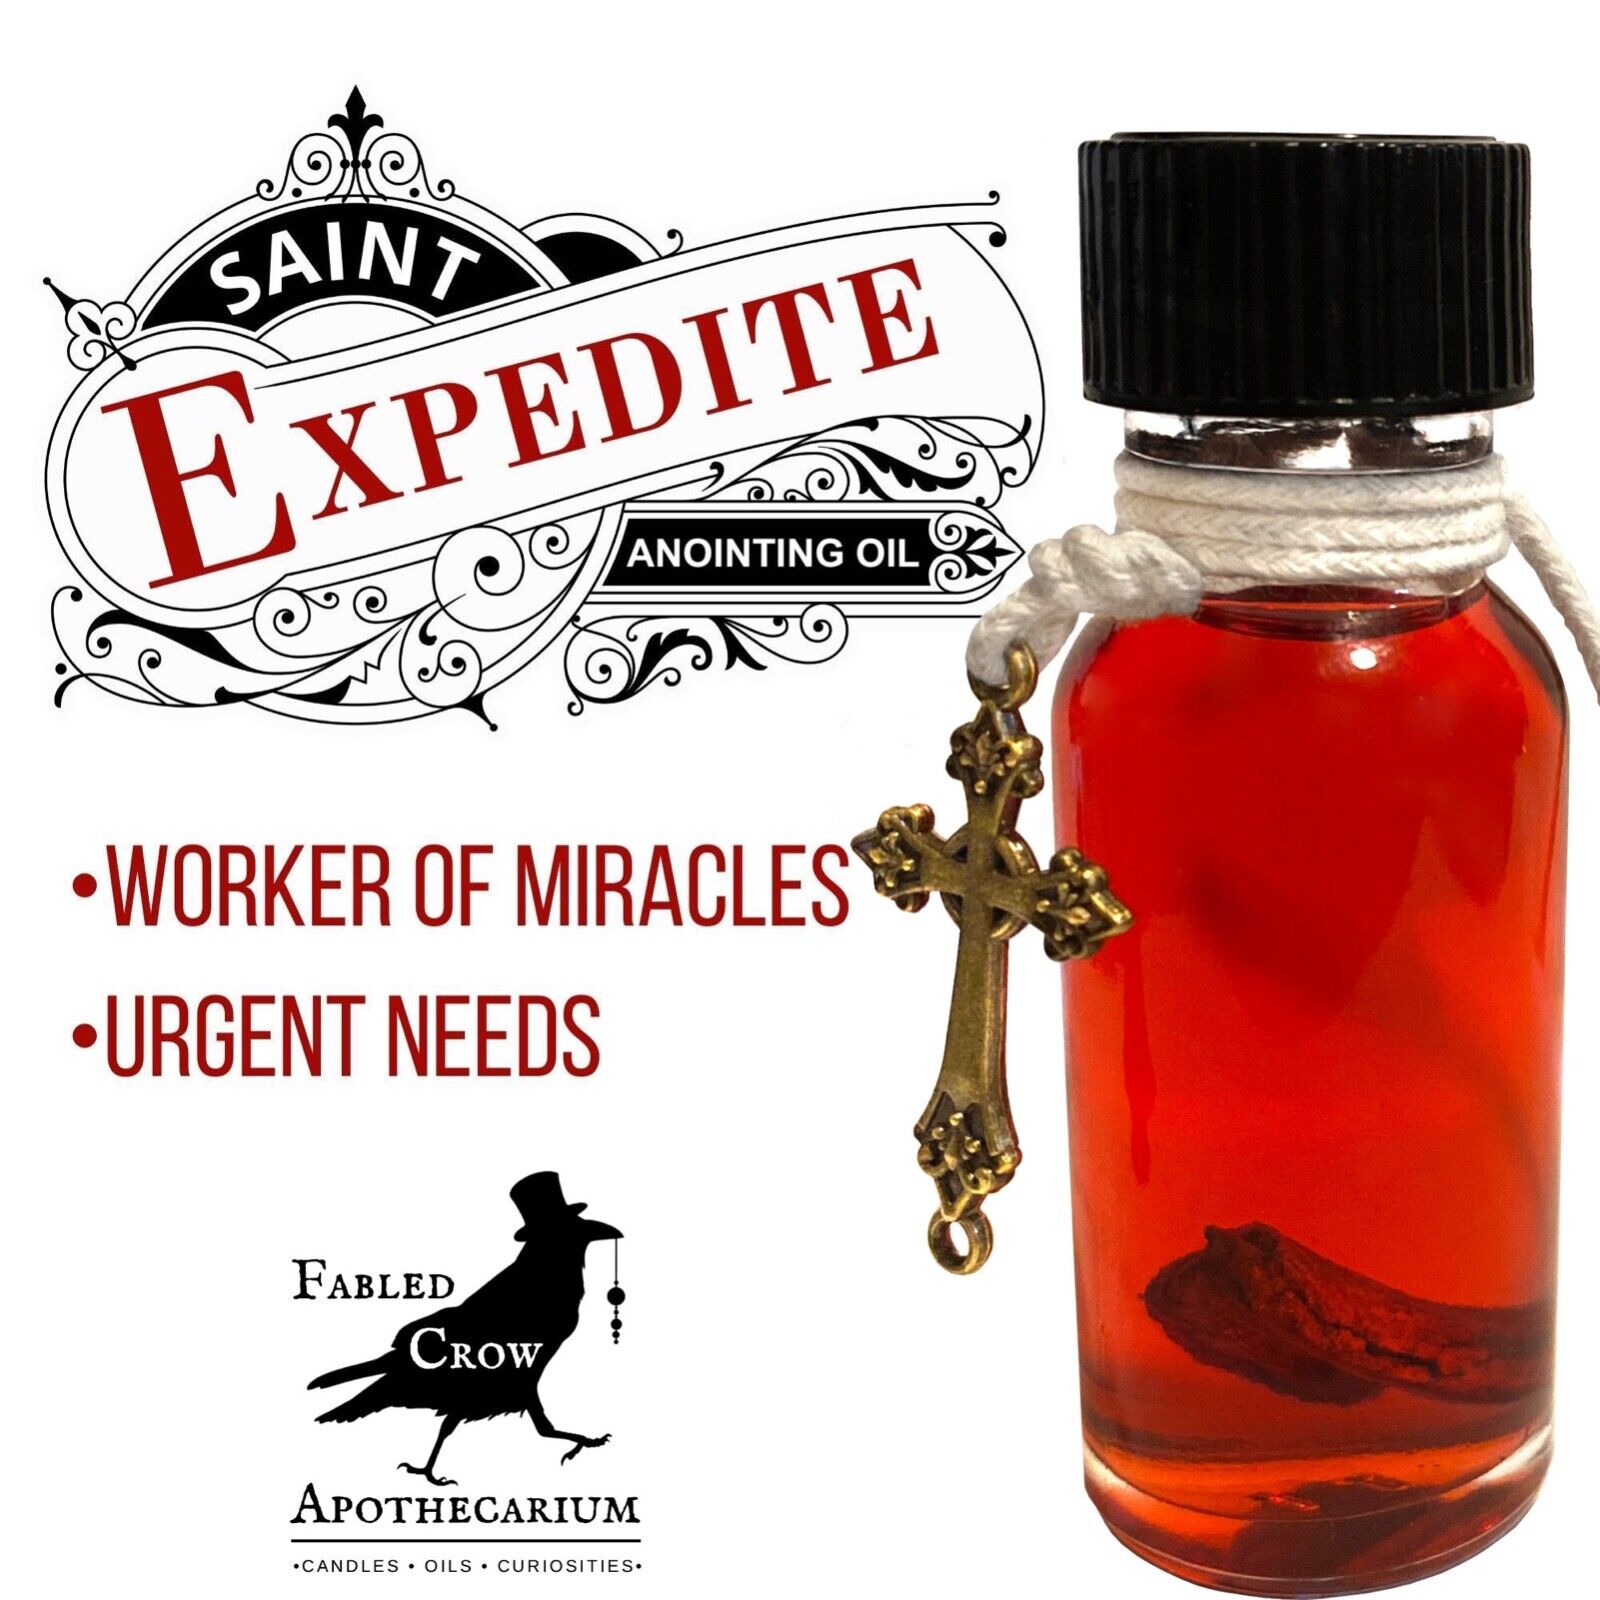 SAINT EXPEDITE Oil Miracles Hoodoo Conjure Witchcraft Anointing FABLED CROW